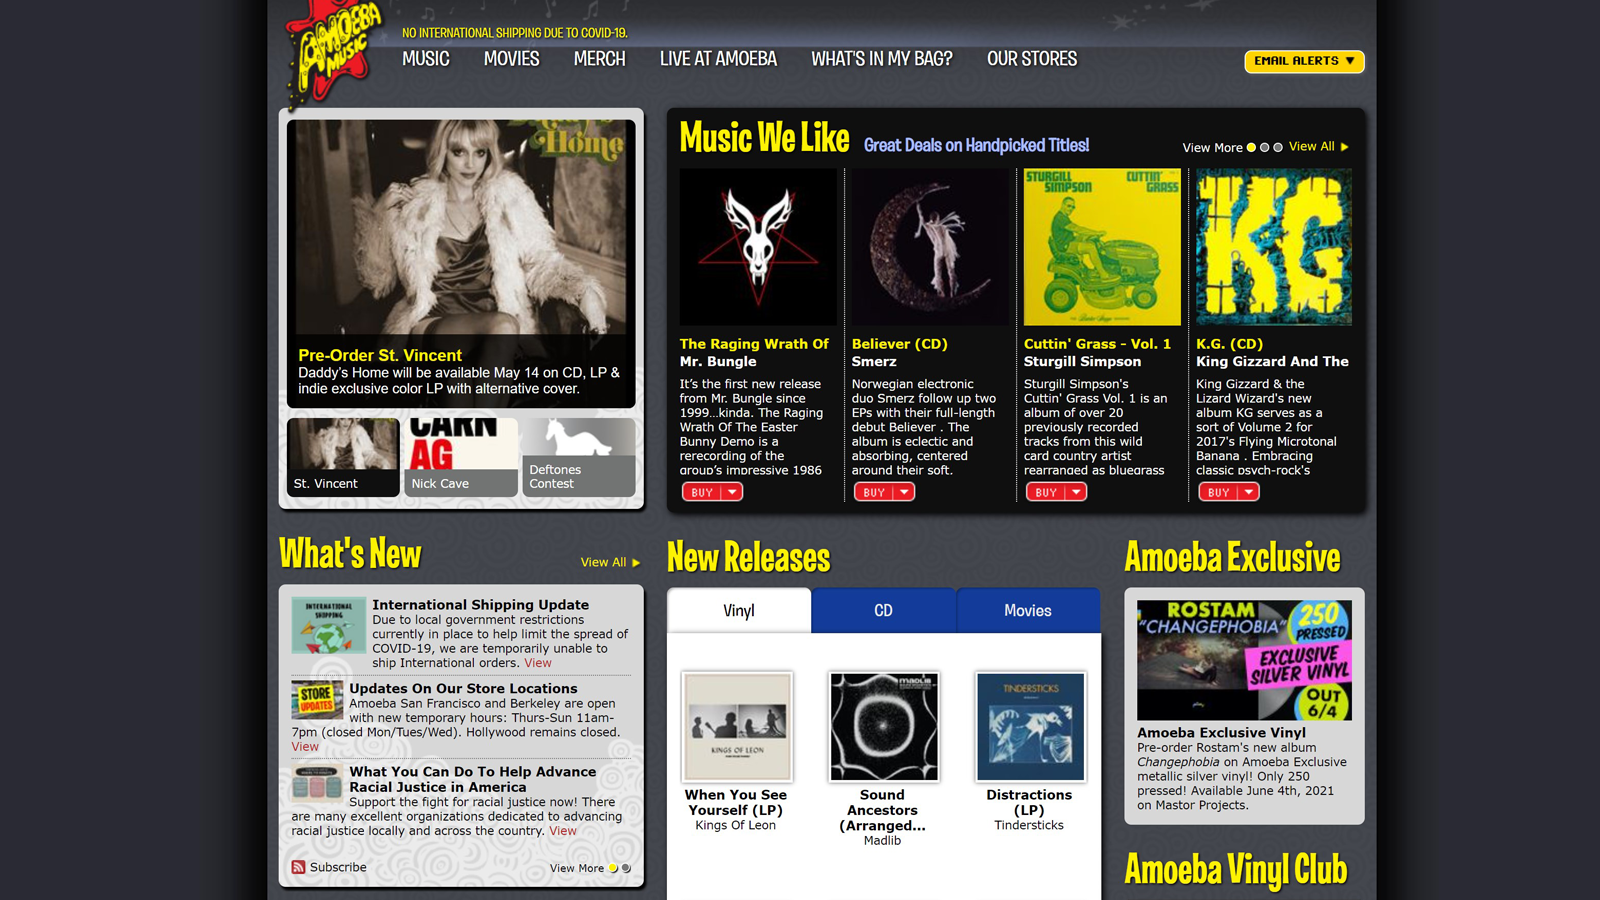 Amoeba Music homepage with vinyls and upcoming events